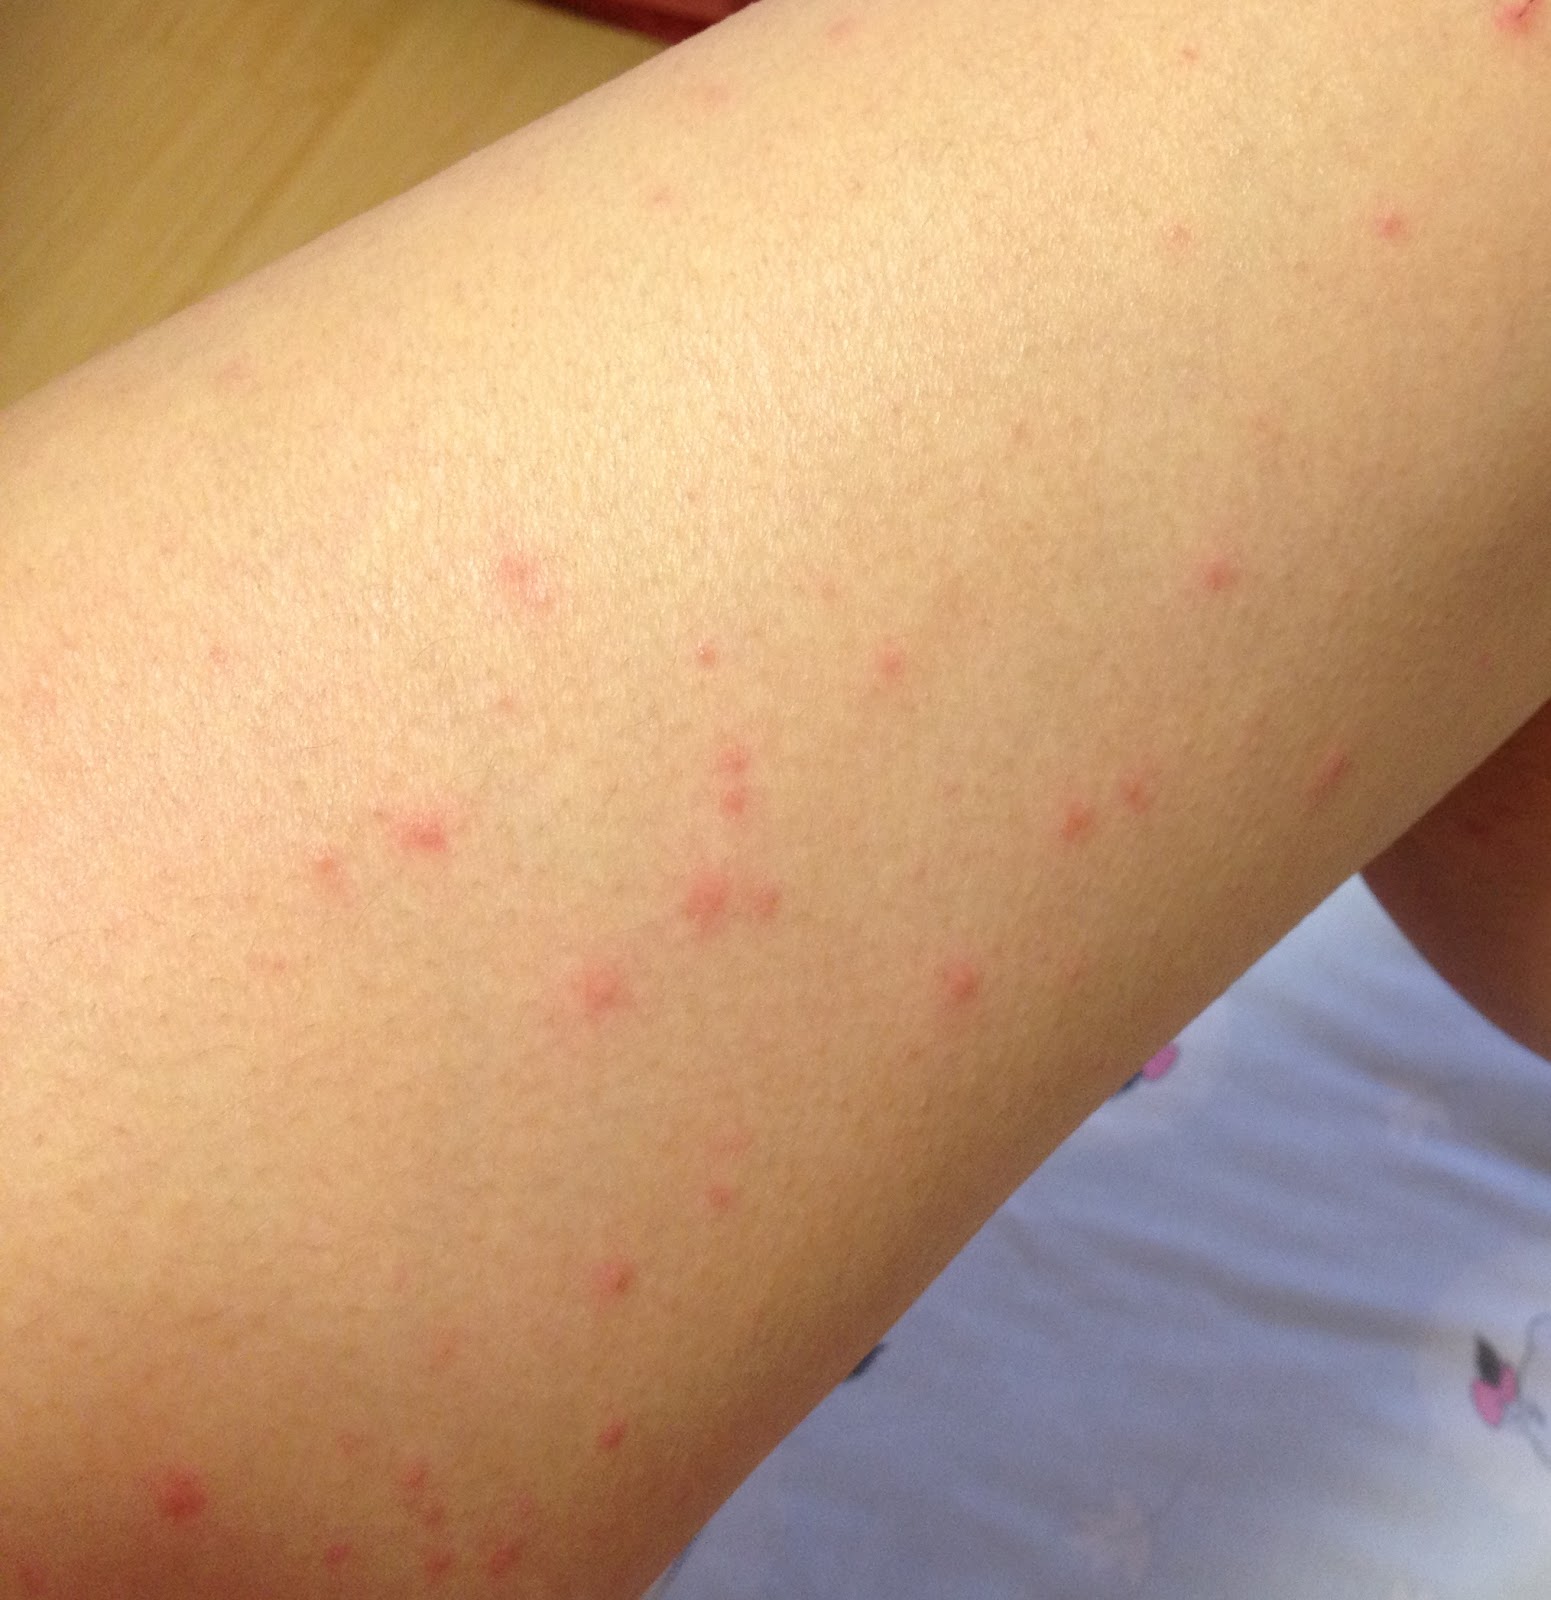 What is Scabies? | Rash Symptoms, Test and Treatment